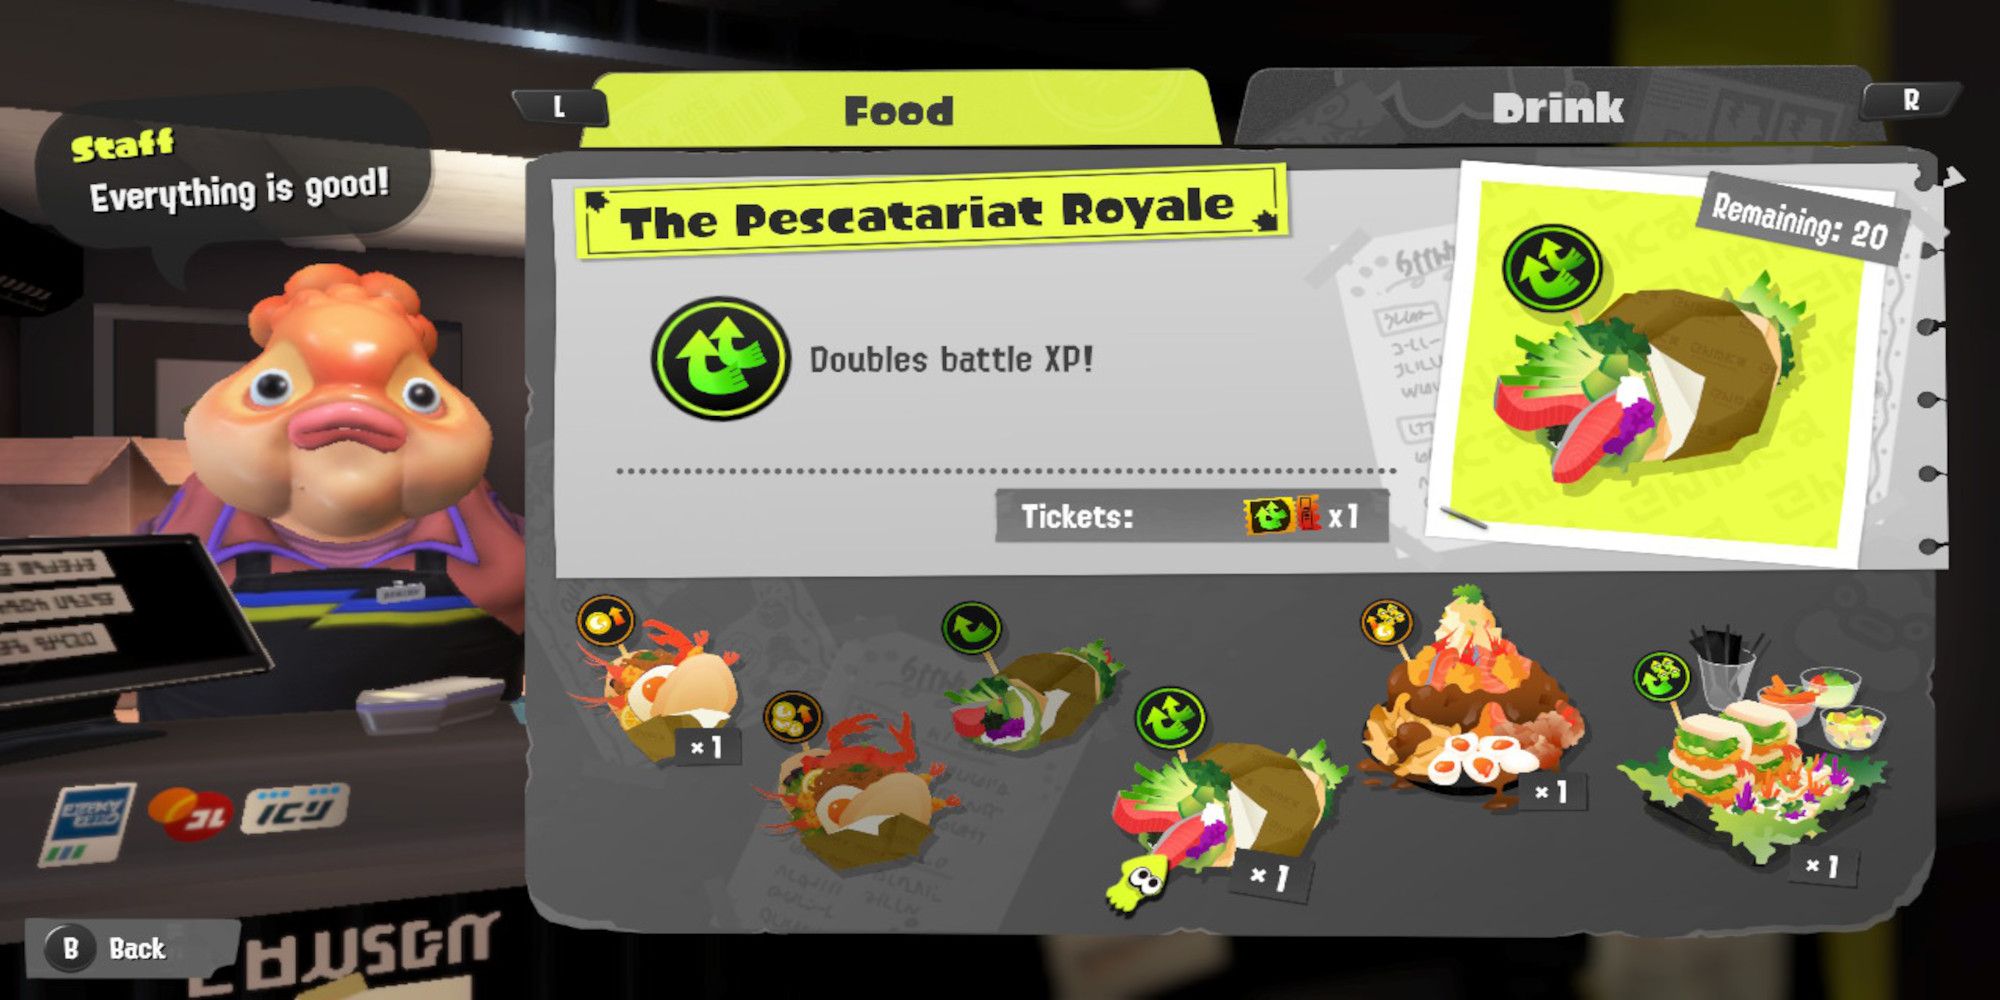 Splatoon 3 food stall featuring the pescatariat royale